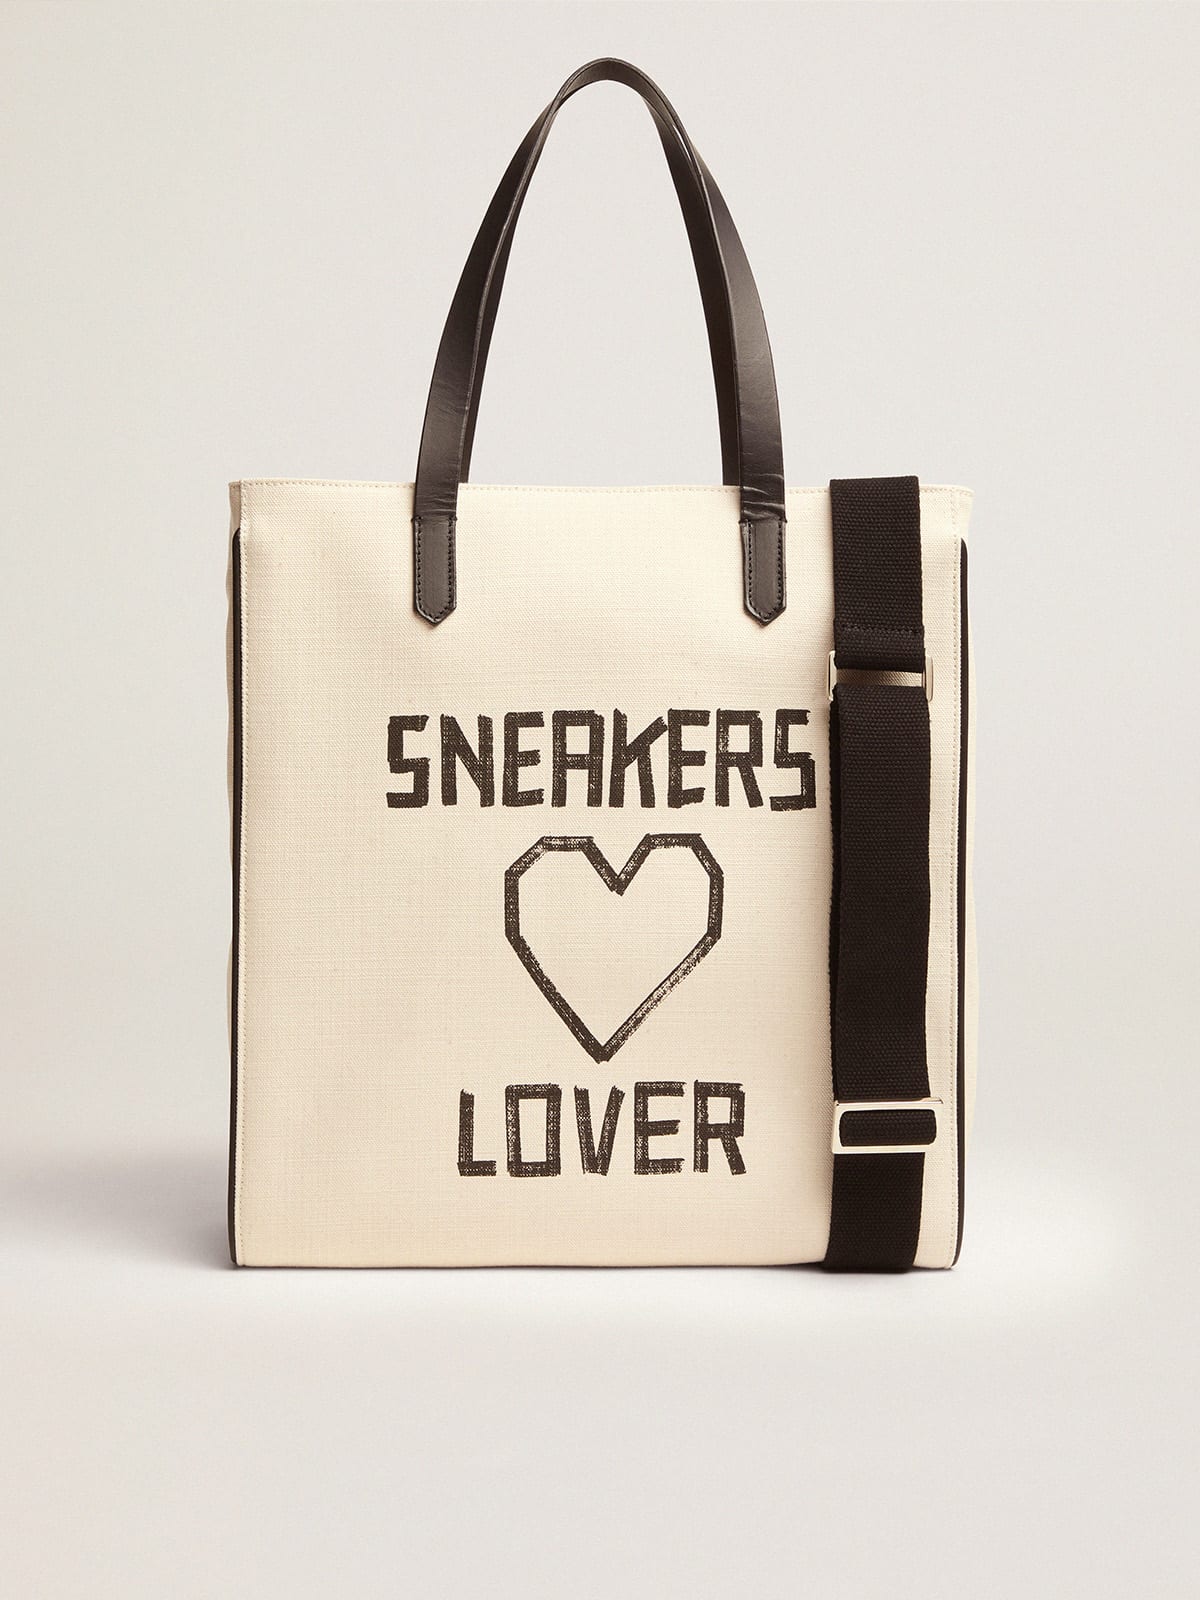 Golden Goose - Borsa California North-South "Sneakers Lovers" in 